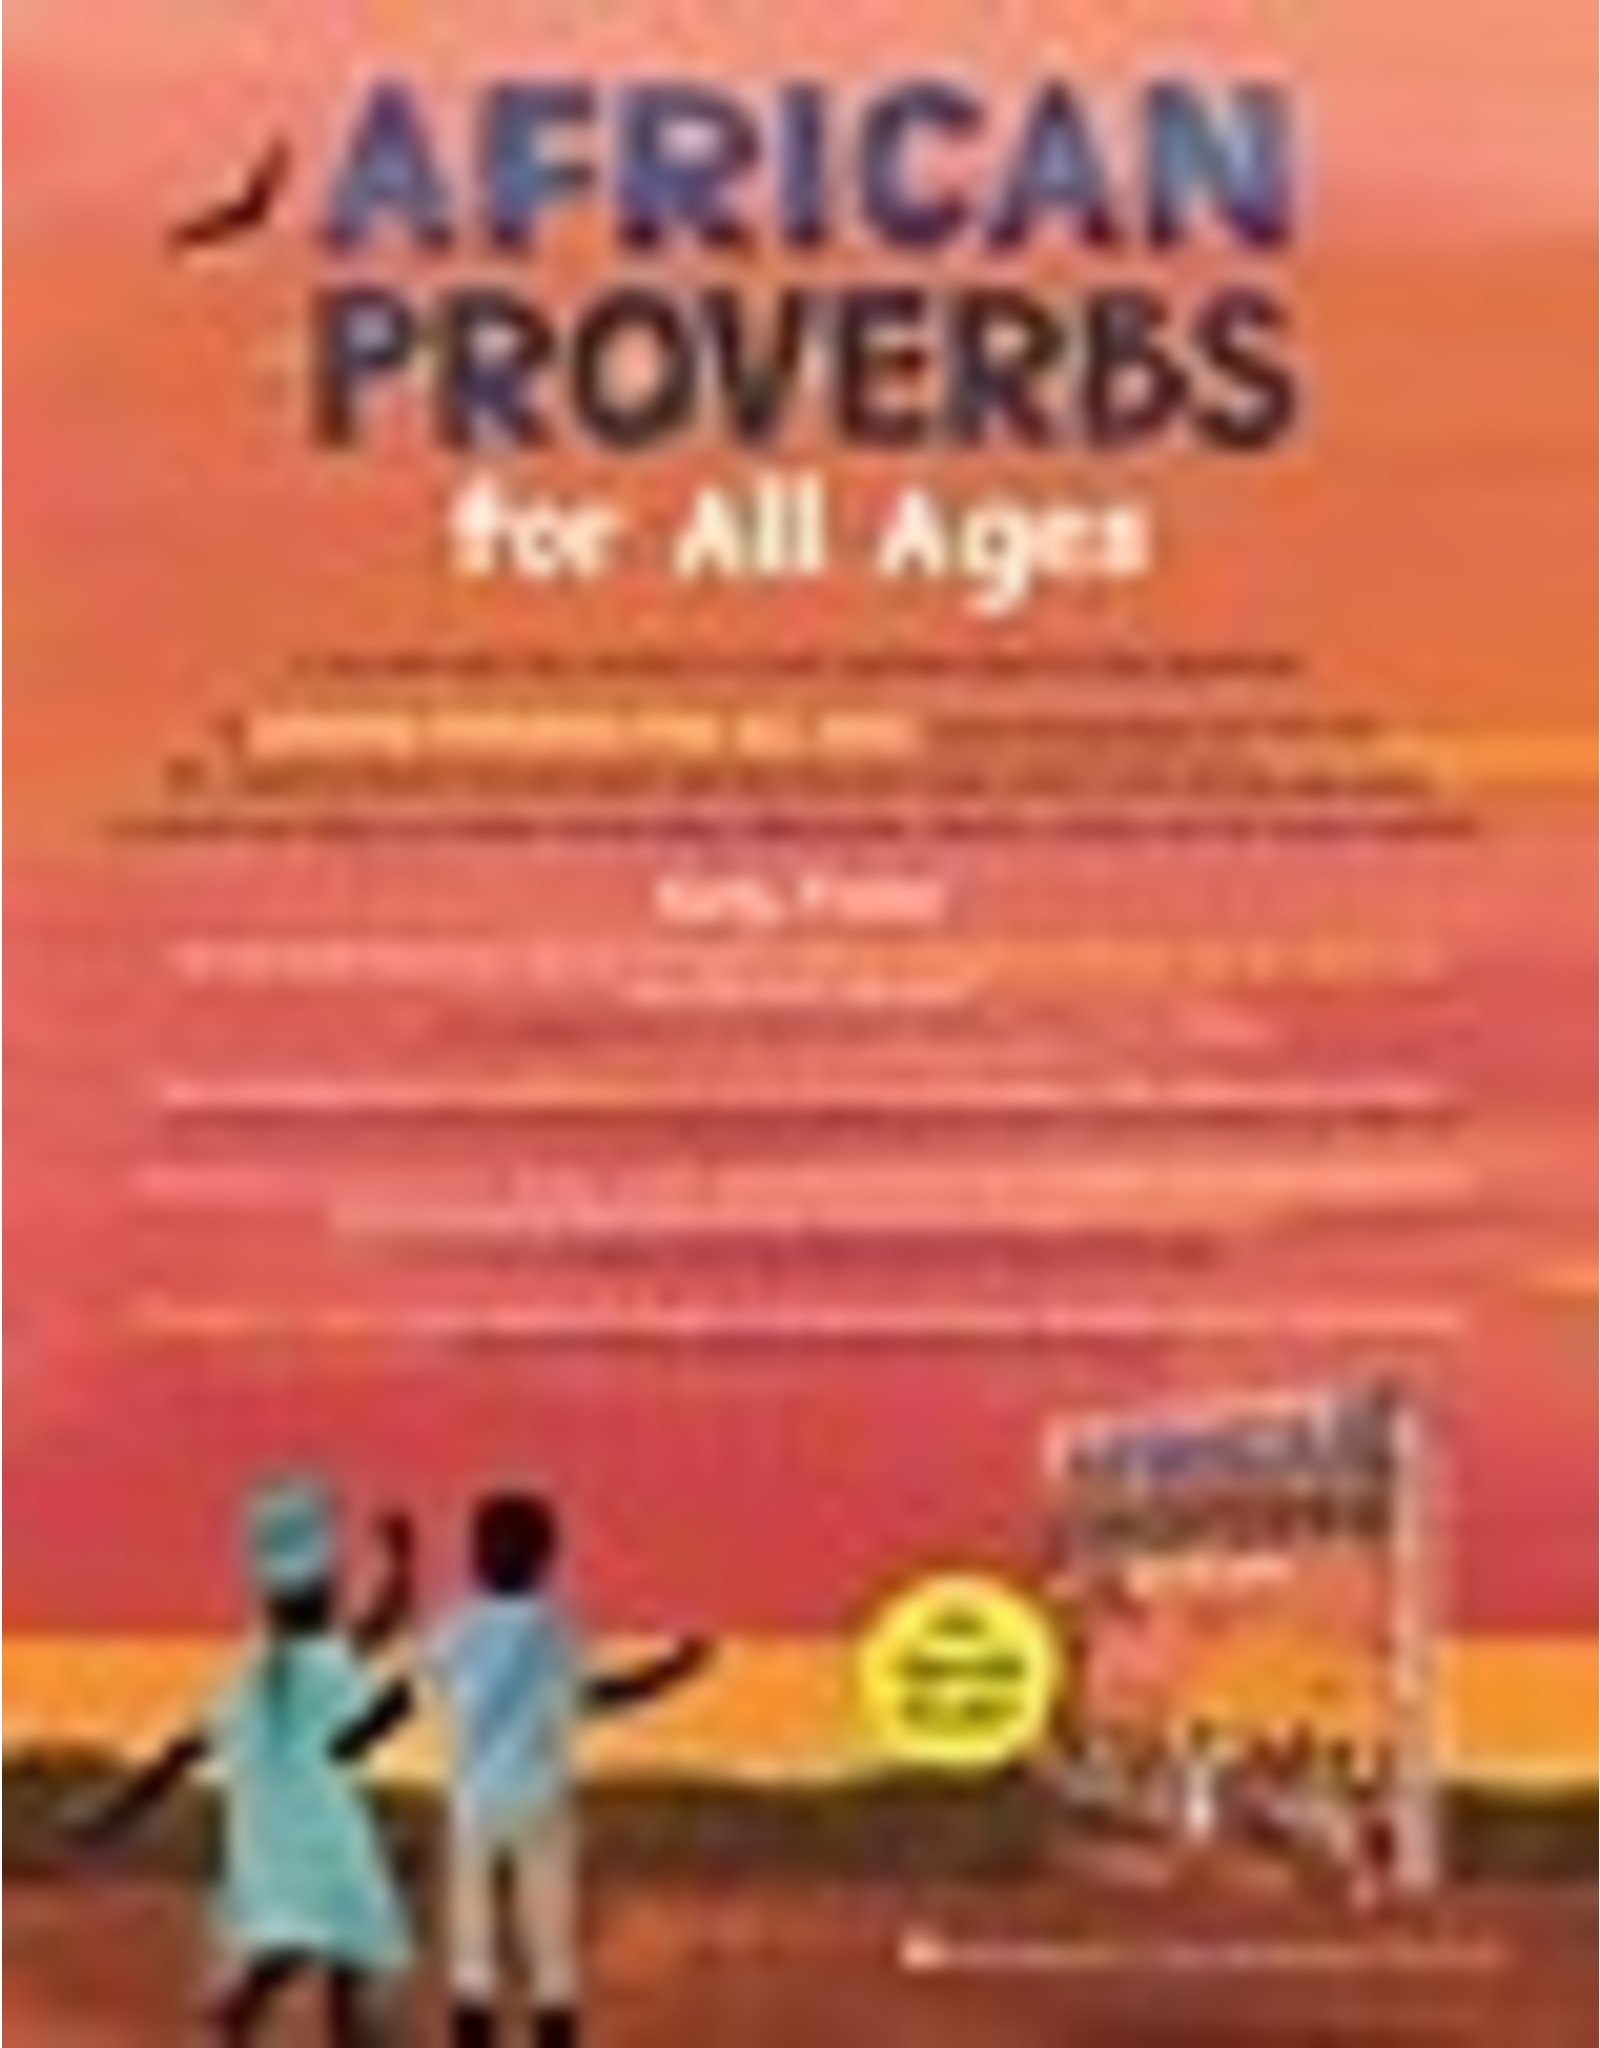 Books African Proverbs : For All Ages collected by Johnetta Betsch Cole and Nelda LaTeef (Griot)